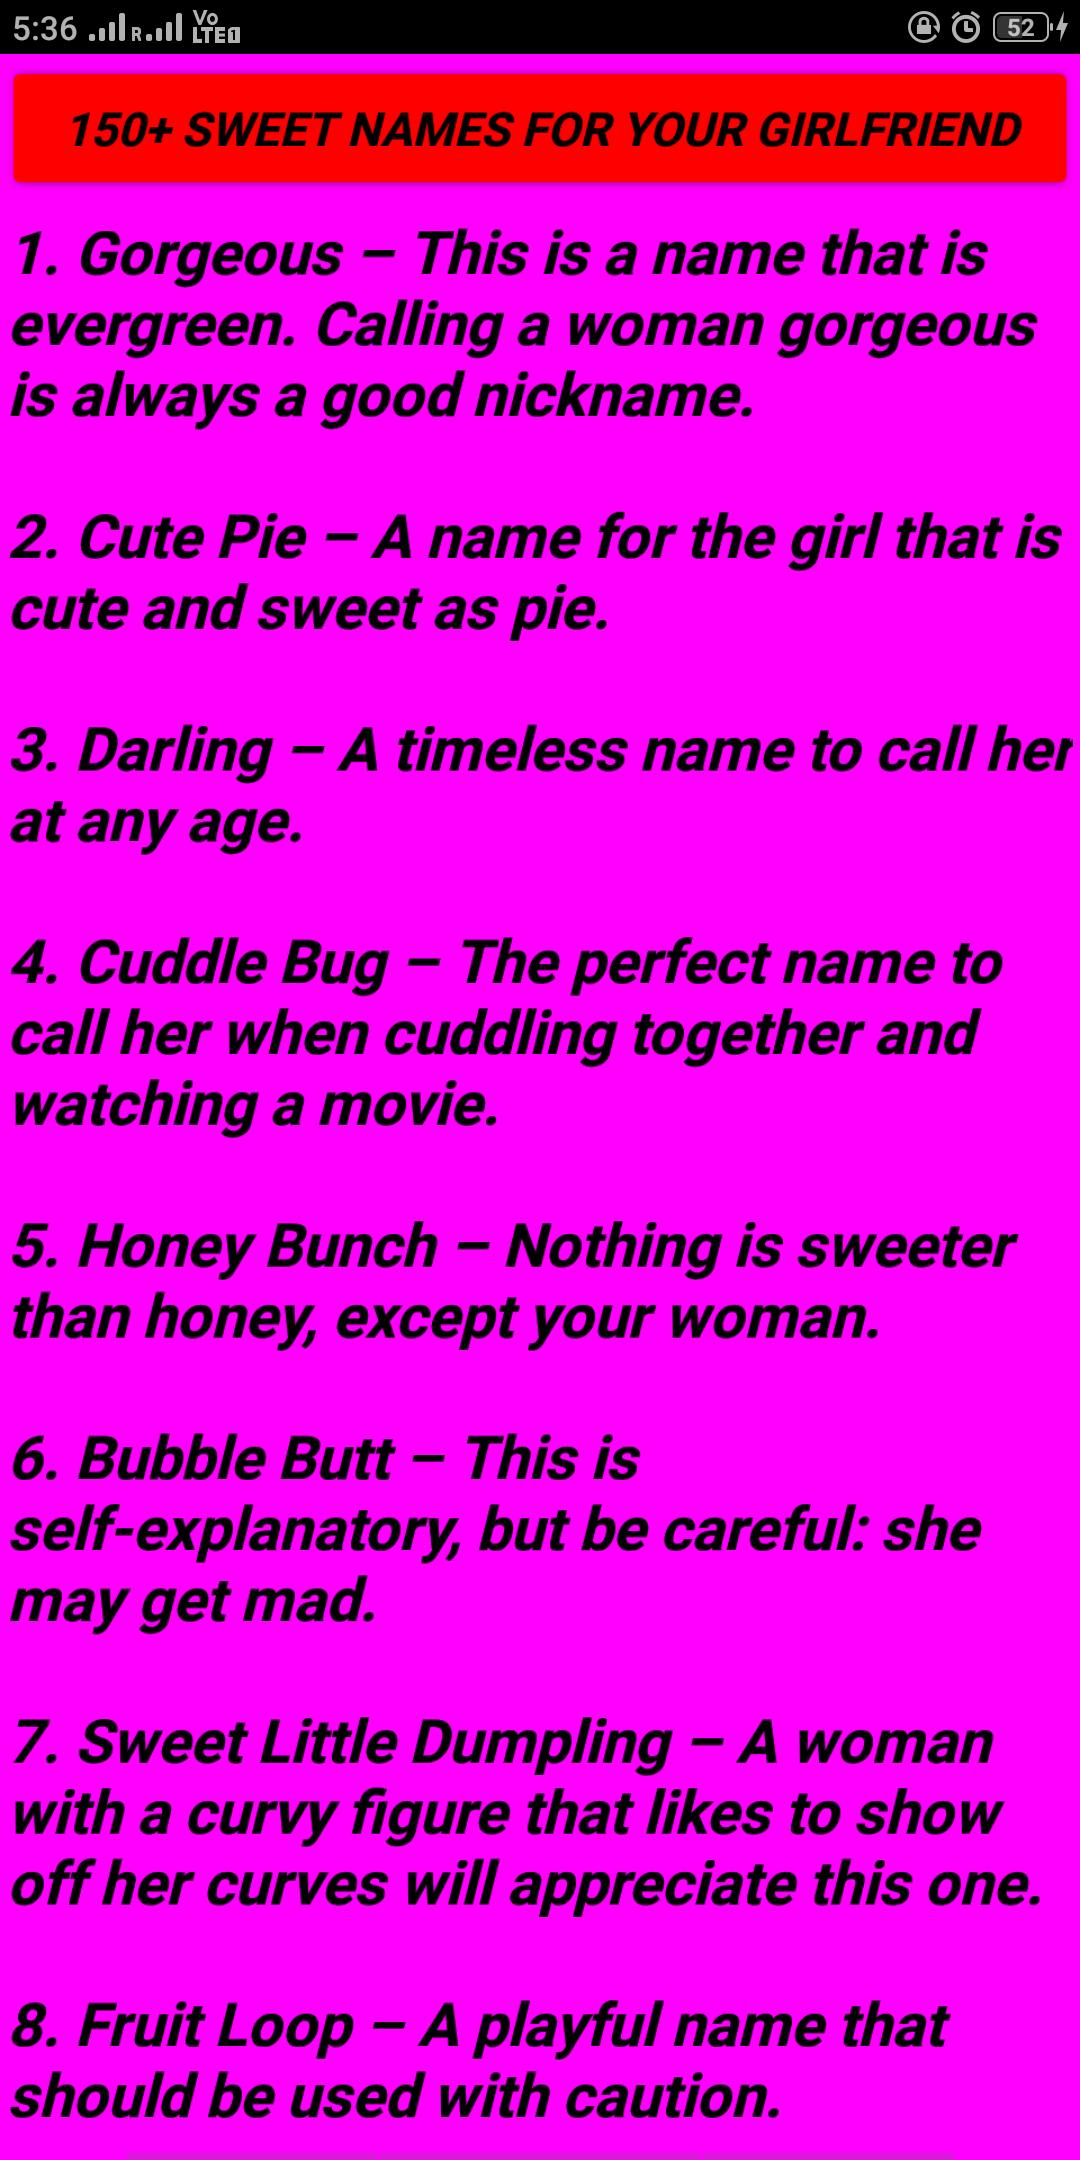 Romantic names for your girlfriend